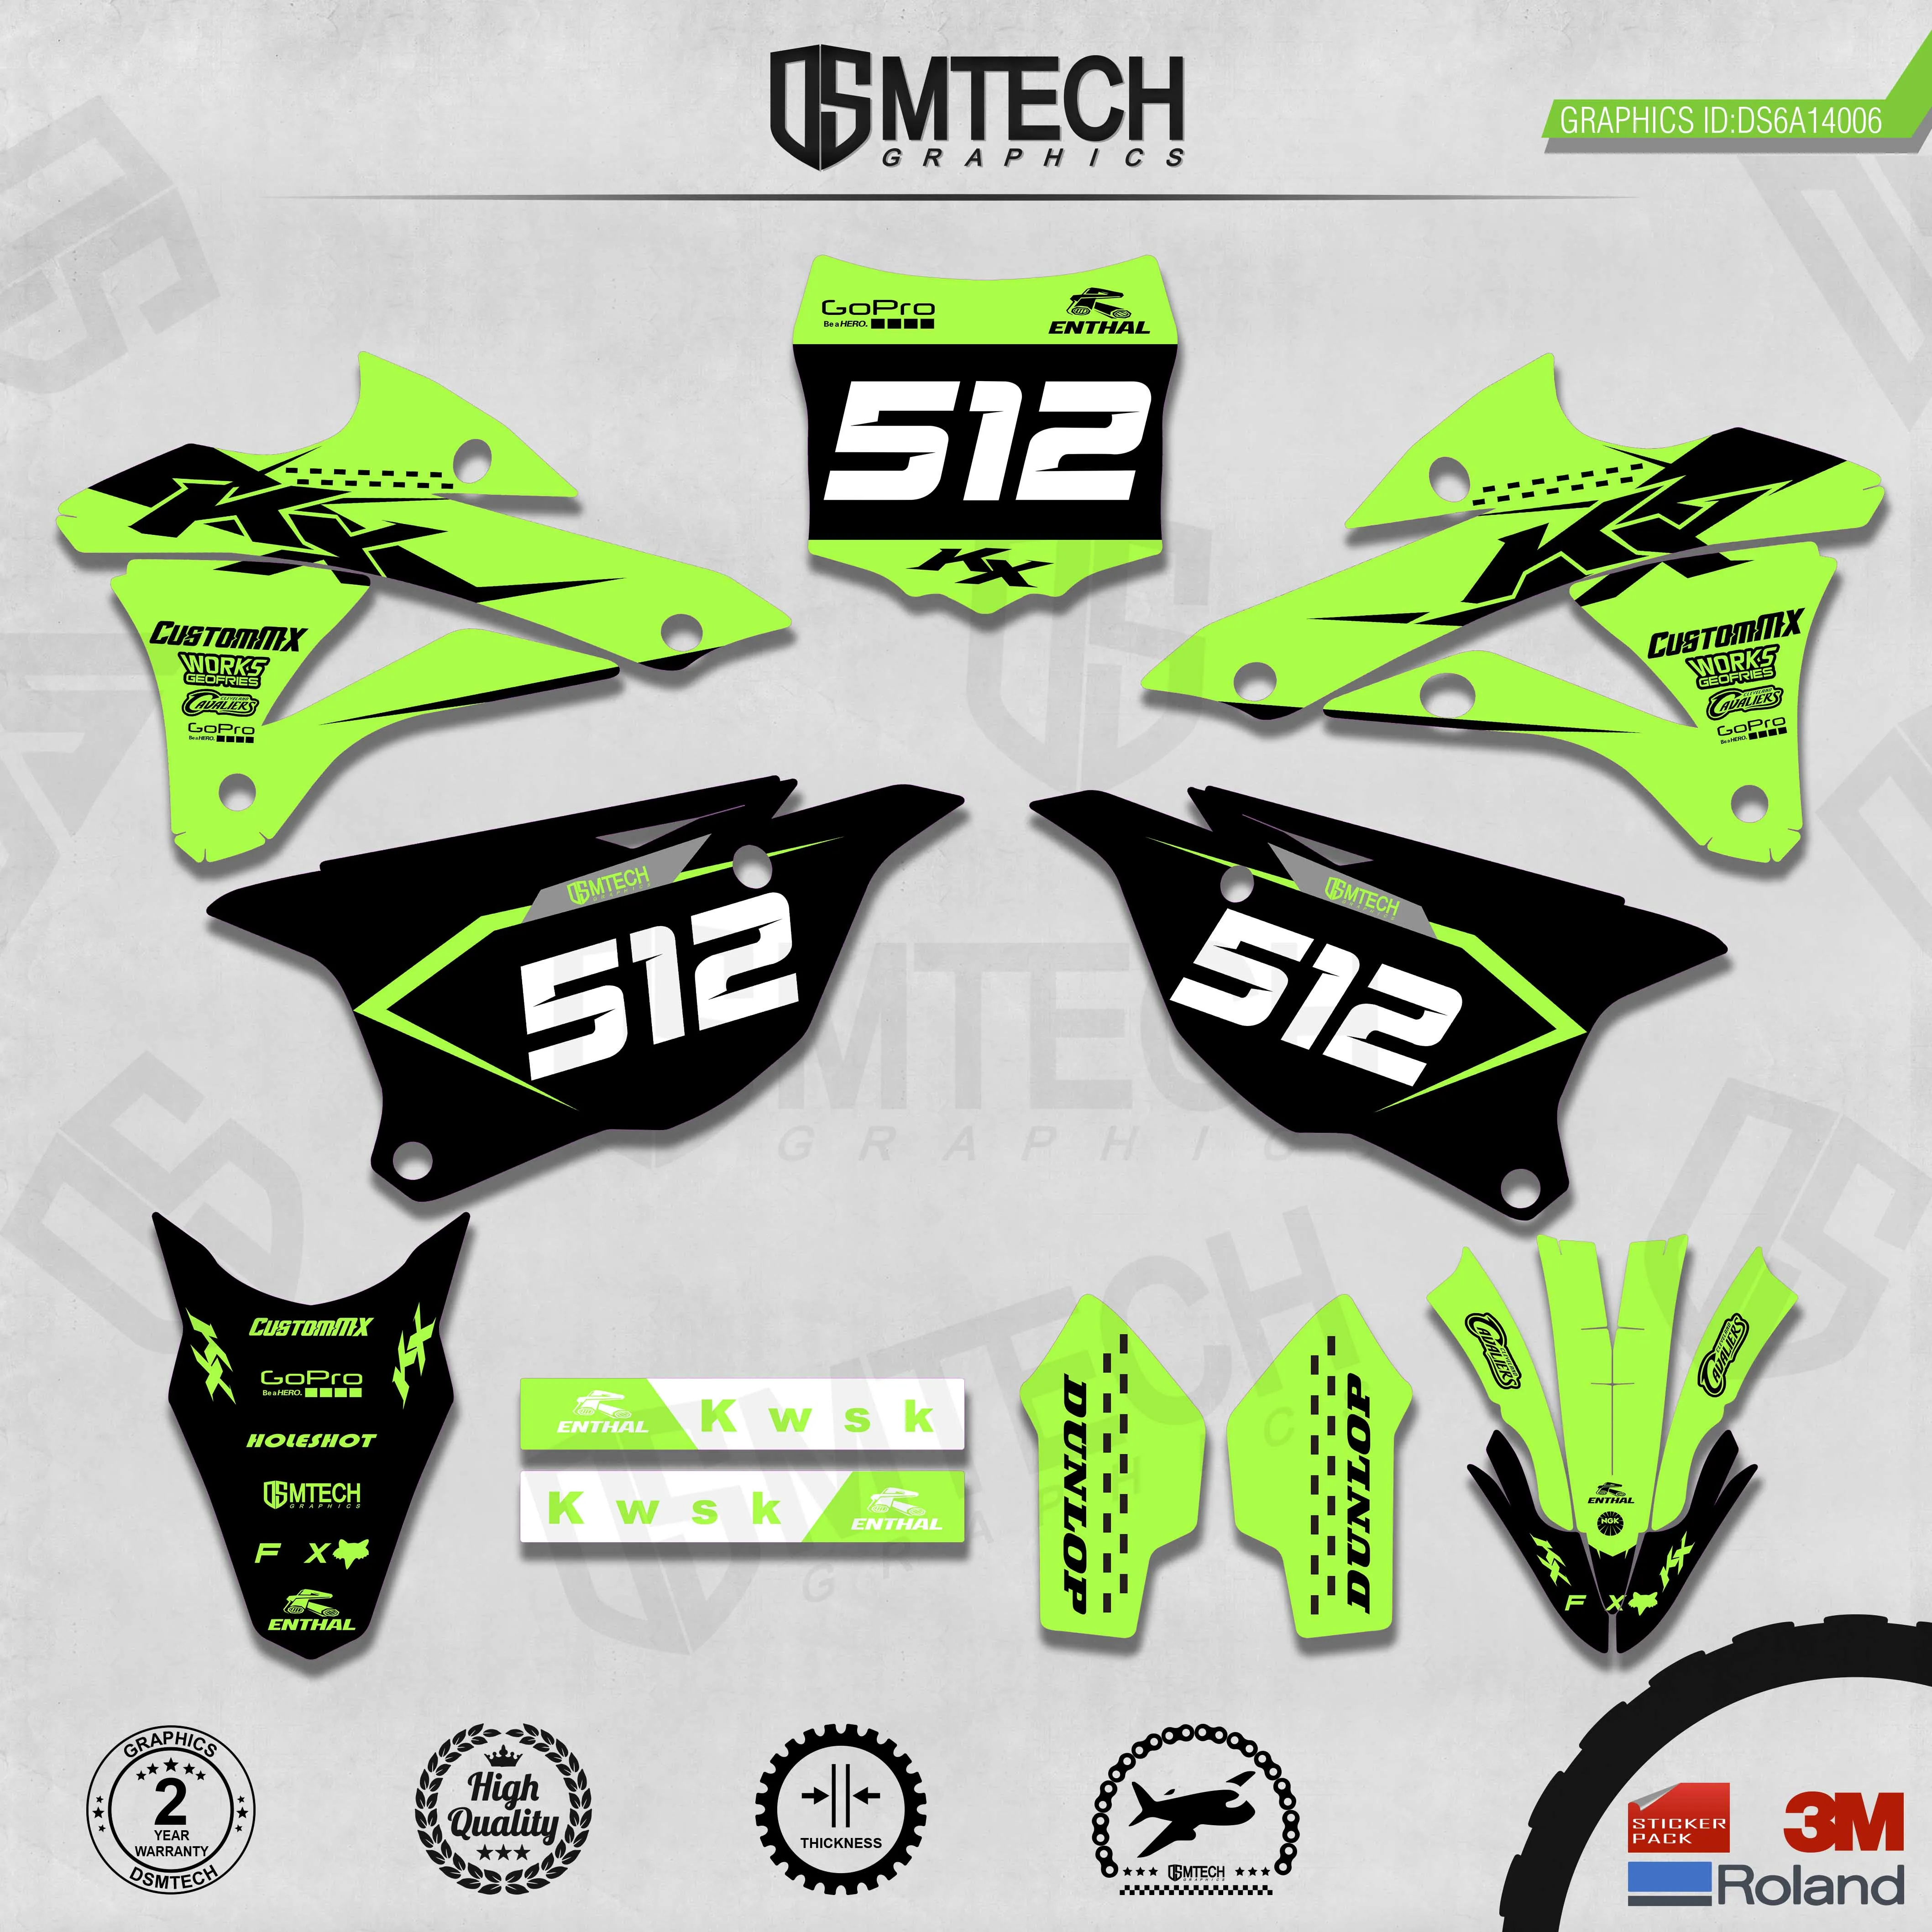 DSMTECH Customized Team Graphics Backgrounds Decals 3M Custom Stickers For KAWASAKI  2014 2015 2016 2017 2018 2019 KX85-100 006